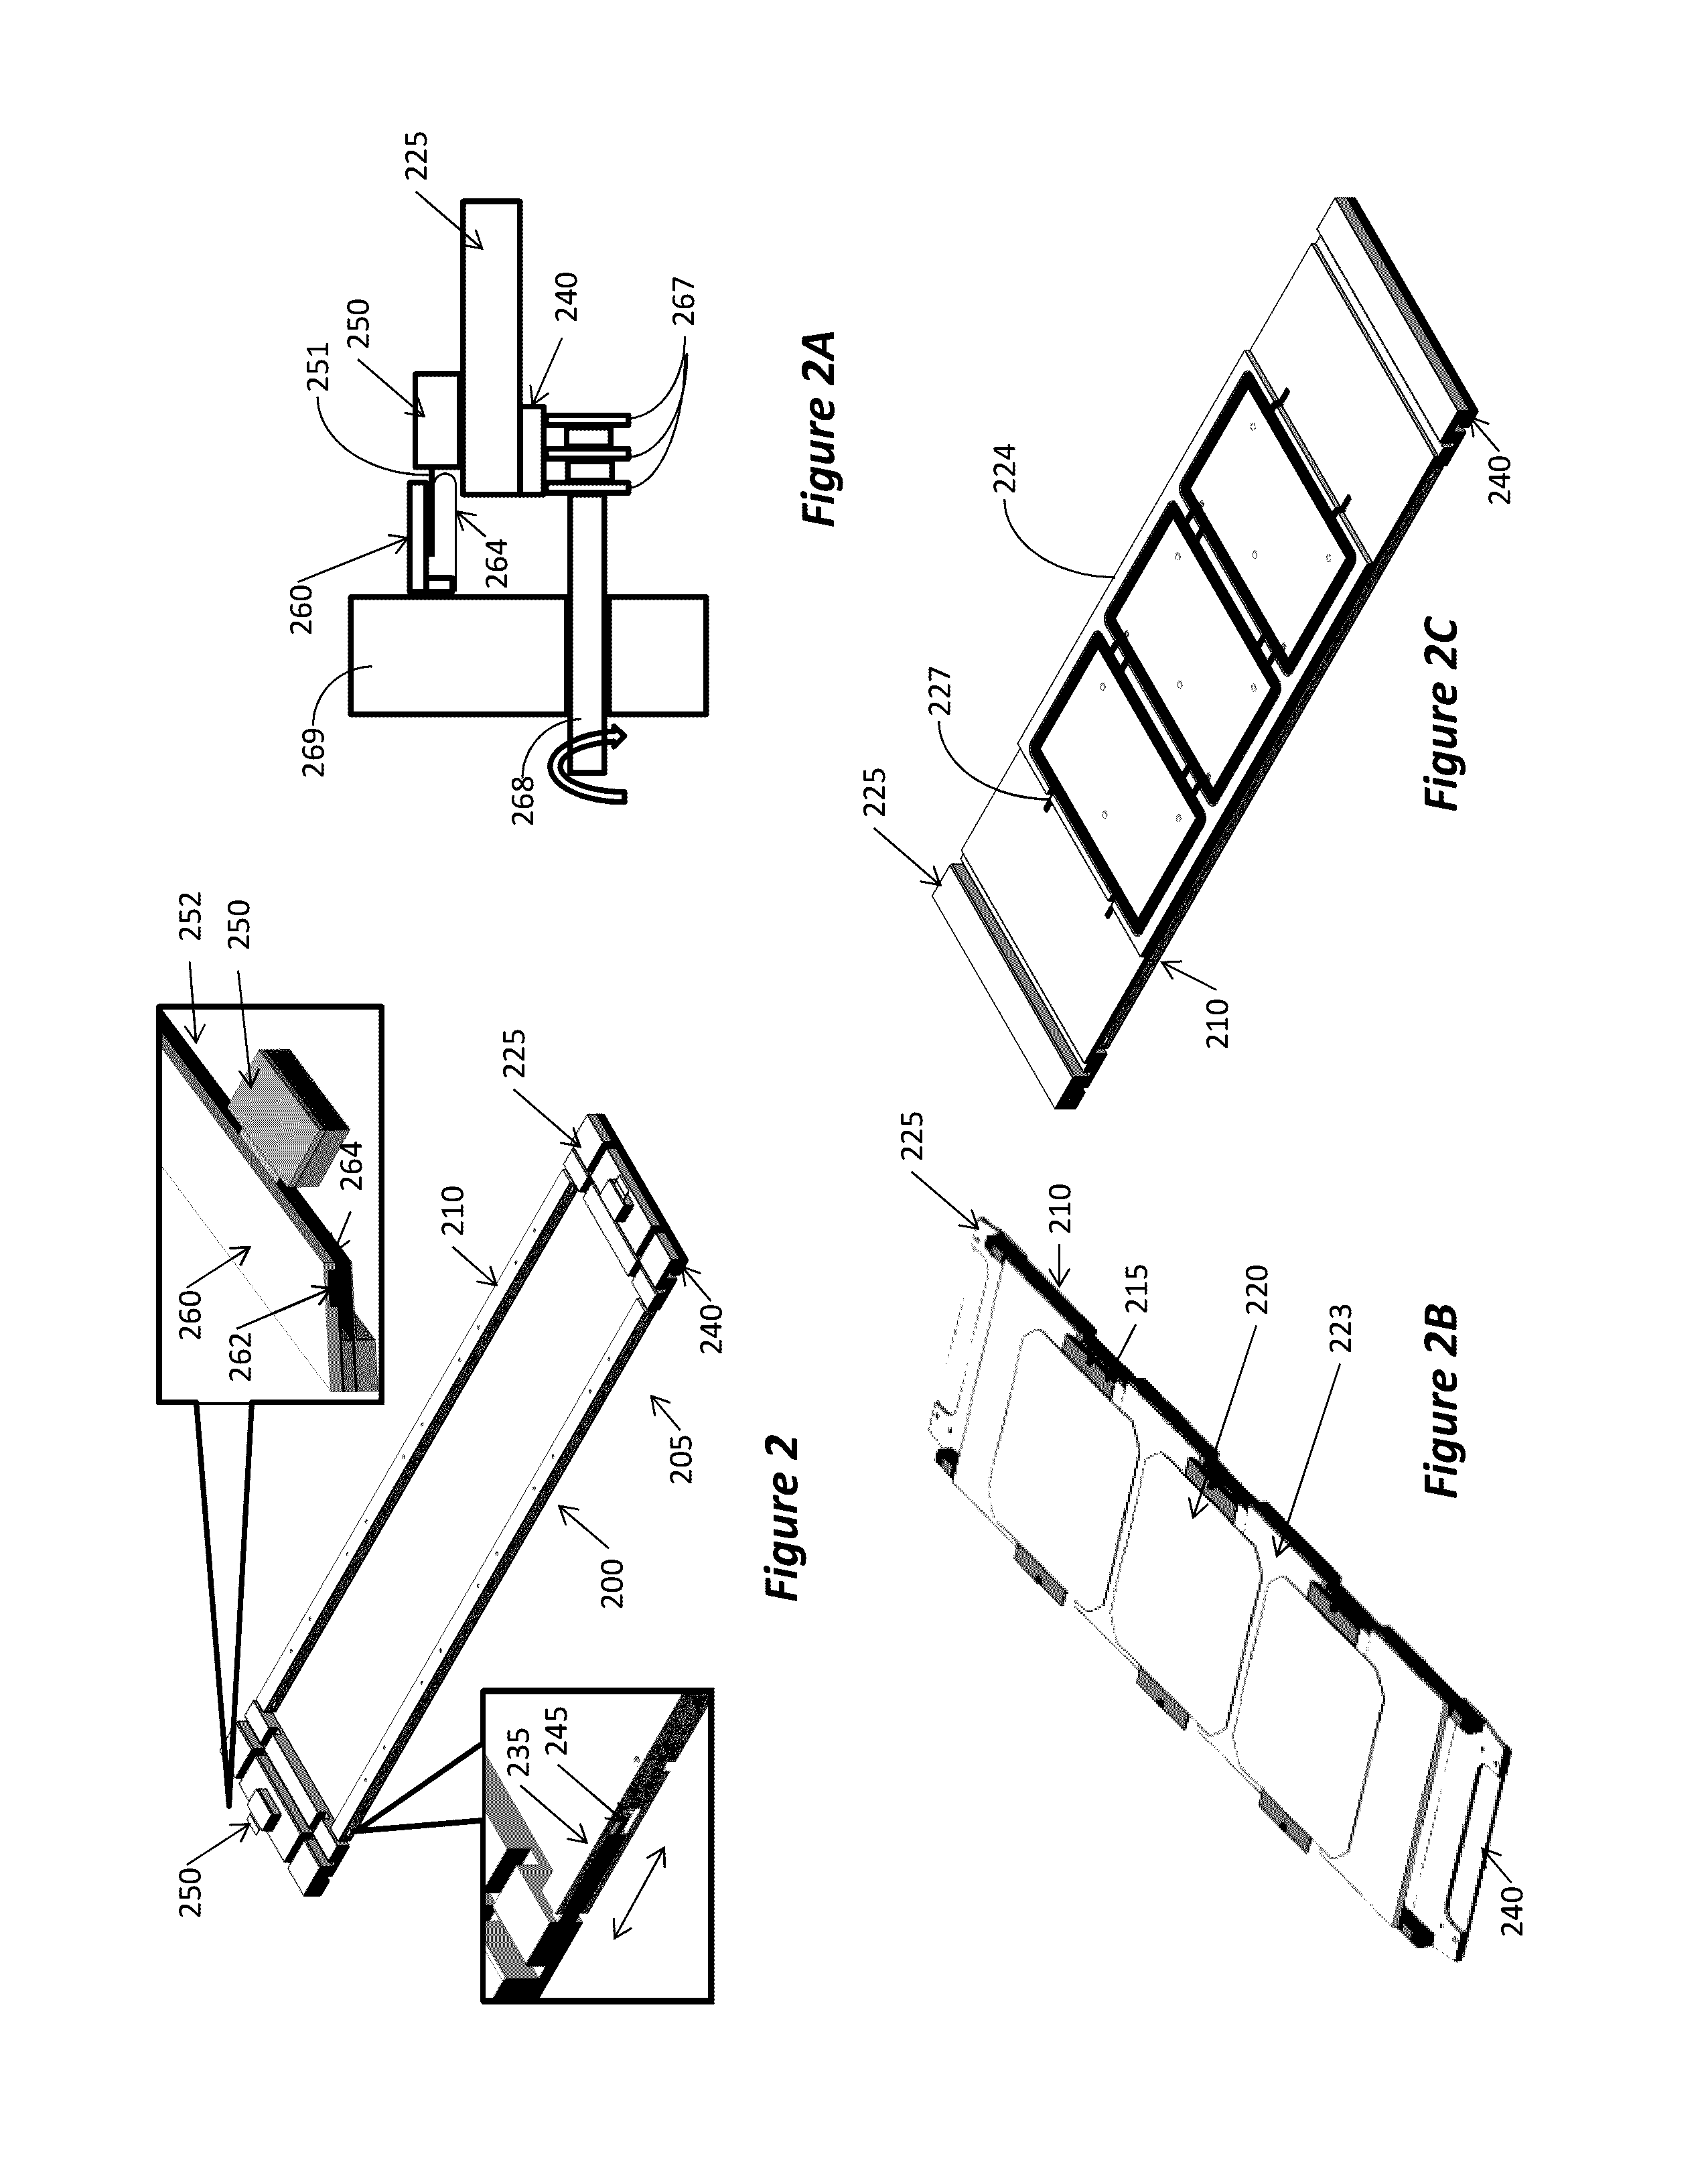 Wafer plate and mask arrangement for substrate fabrication